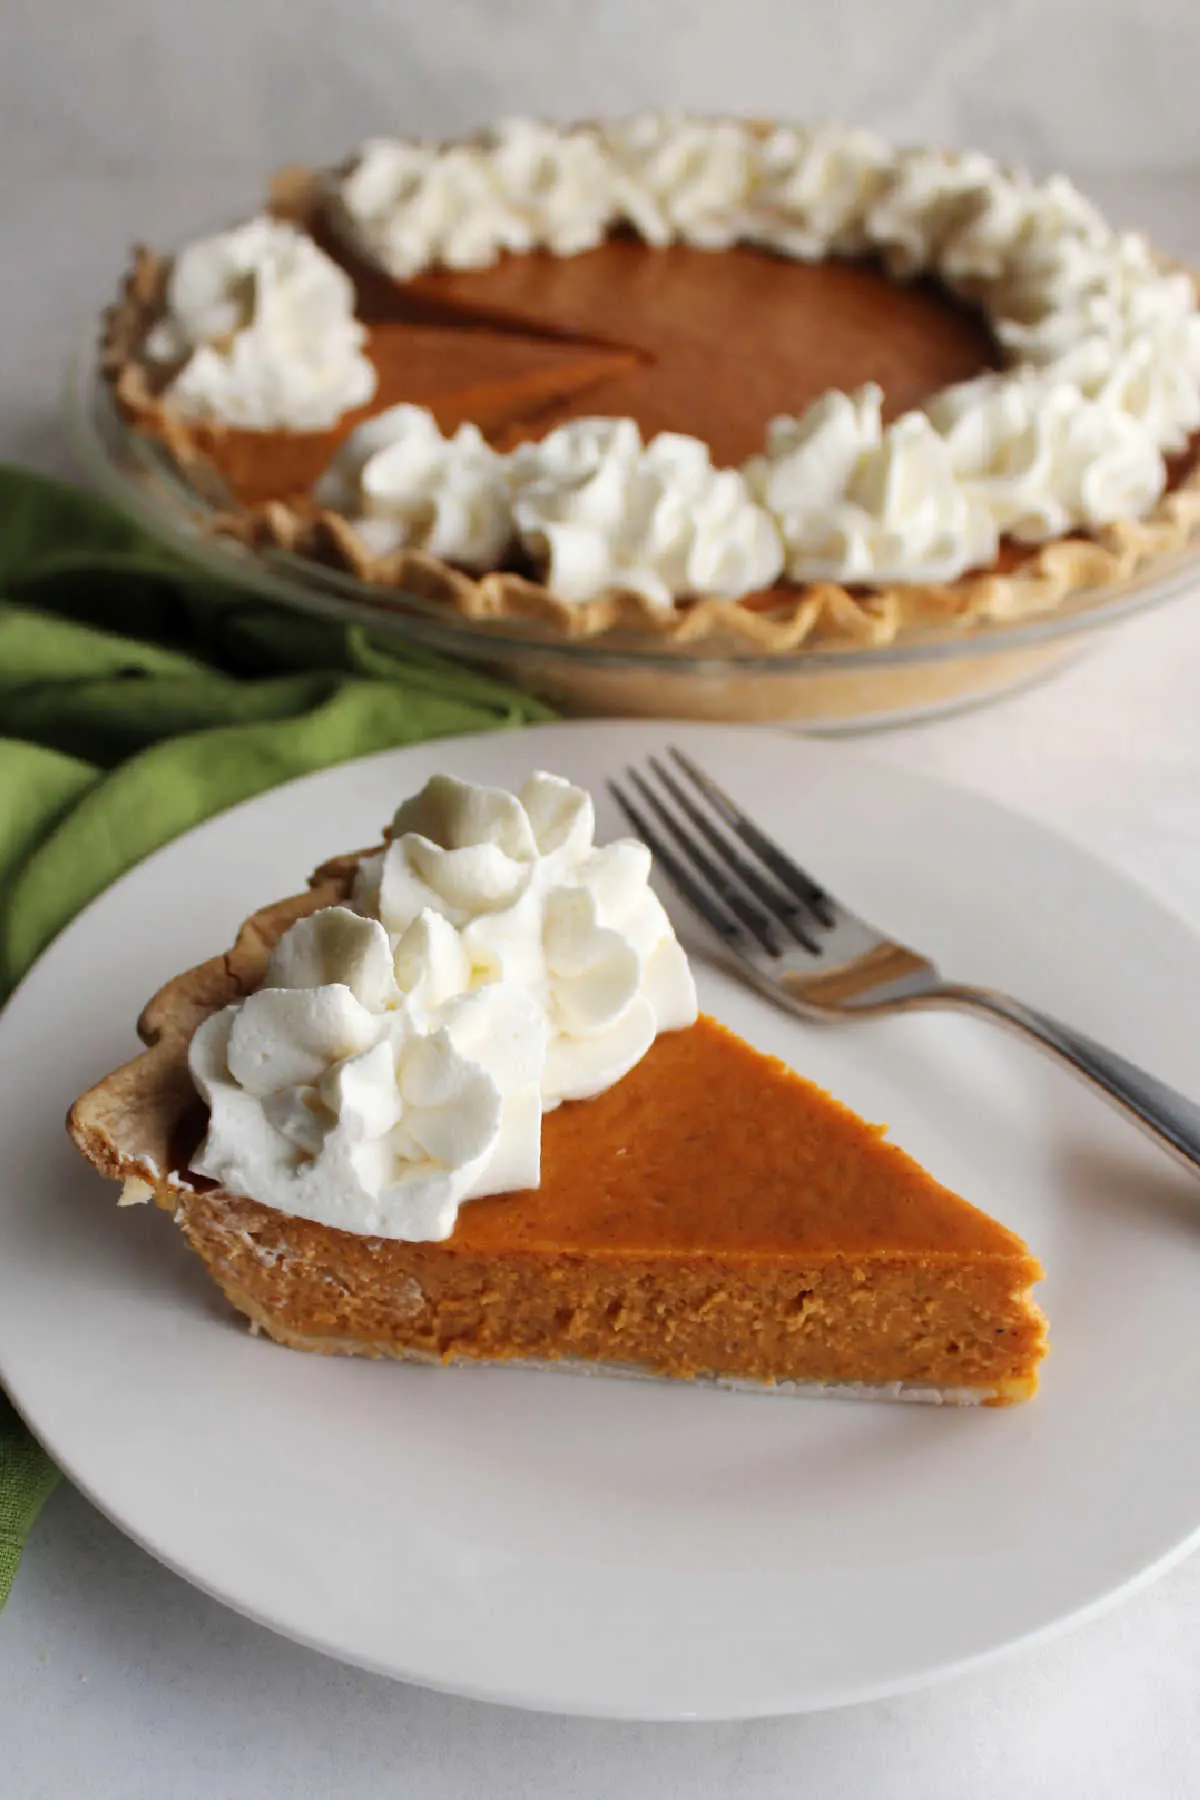 Sliced of pumpkin pie on plate topped with whipped cream and a fork nearby, ready to eat.